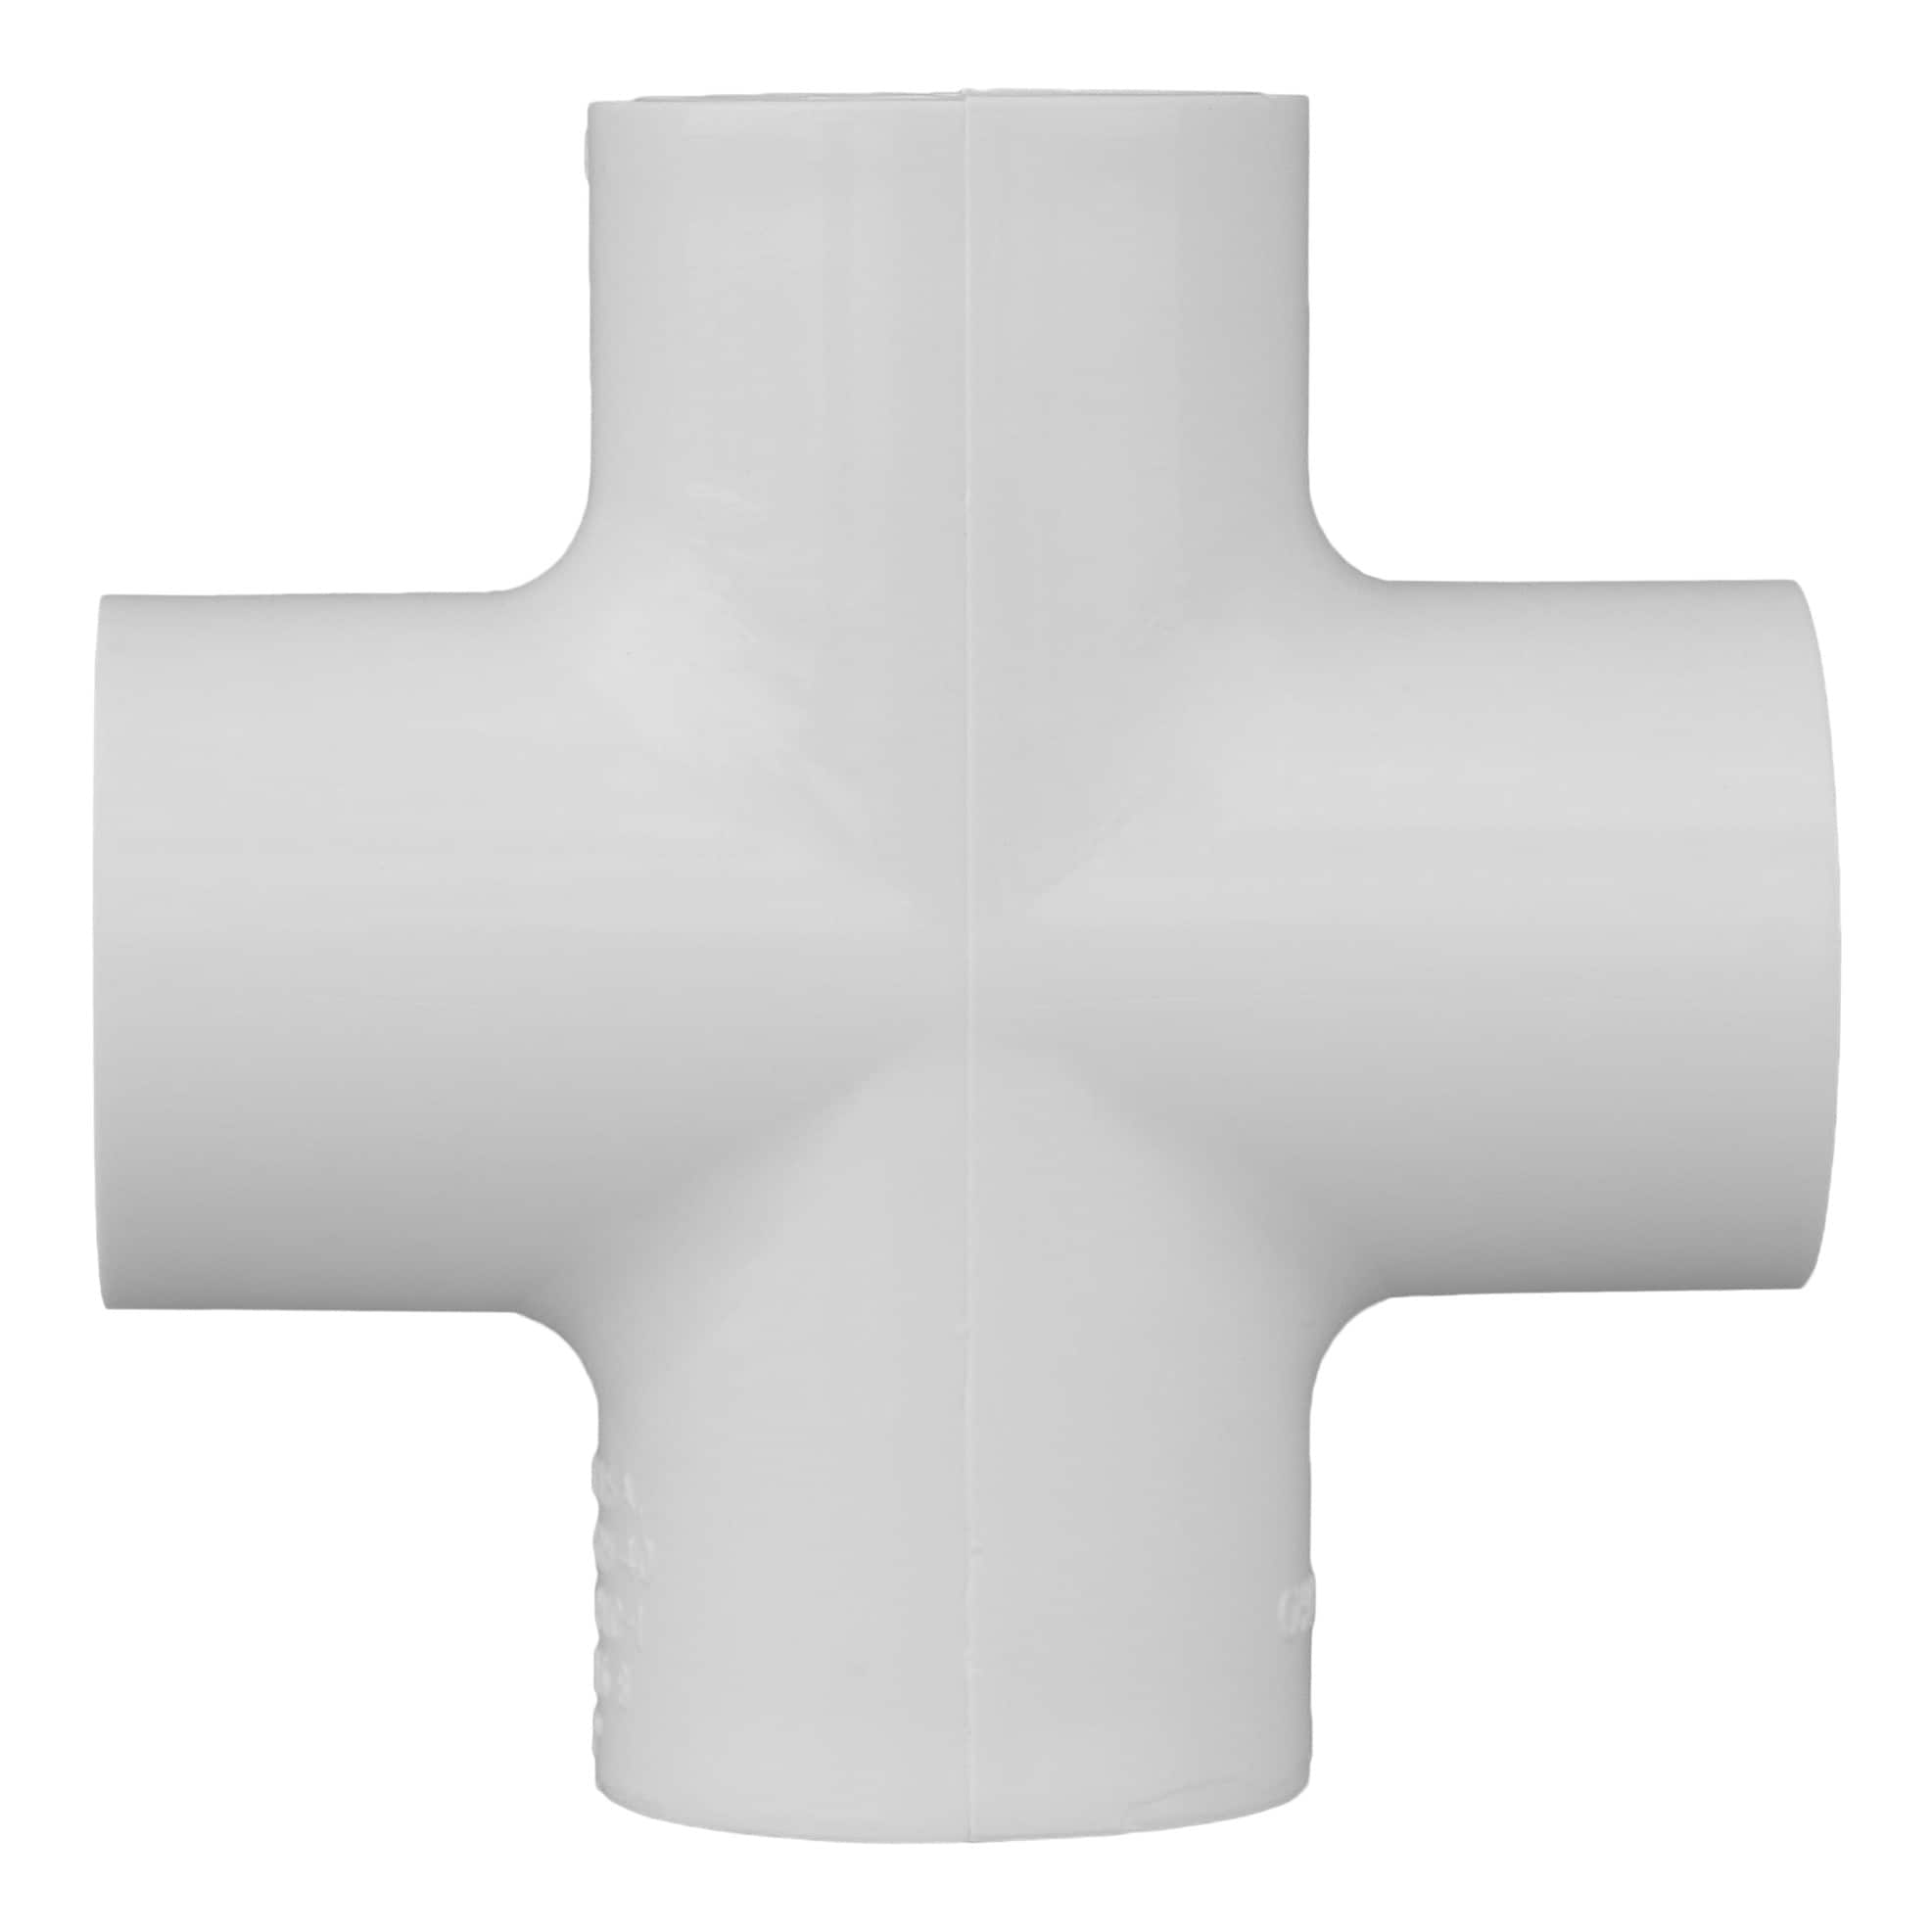 1/2 (15mm) PVC Pipe Fittings / Connector